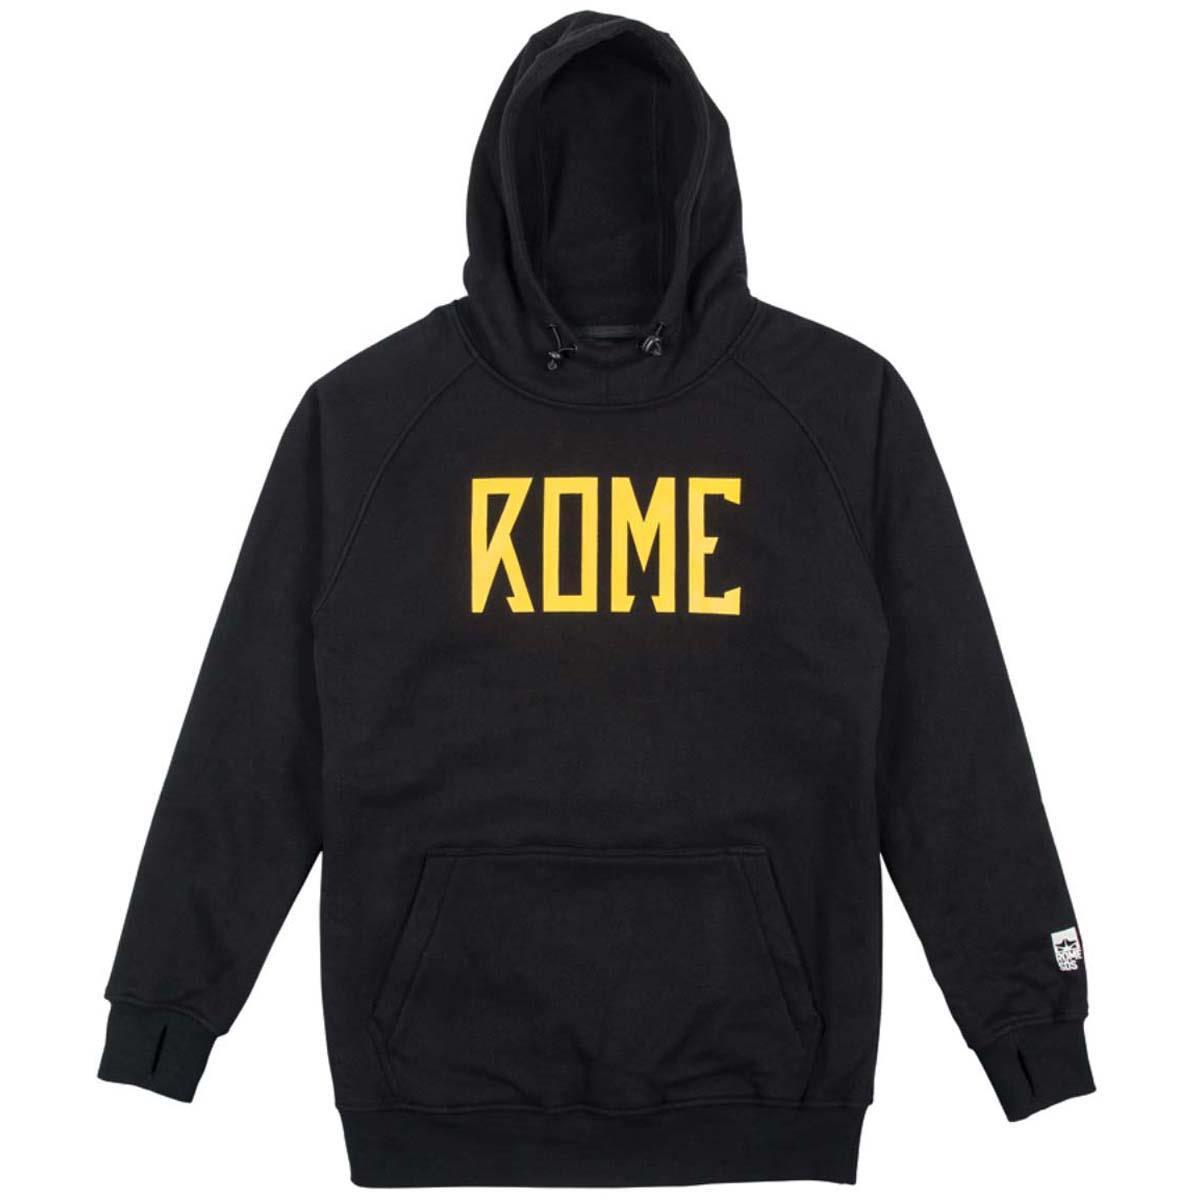 Rome Riding Pullover Hoodie - Men's 